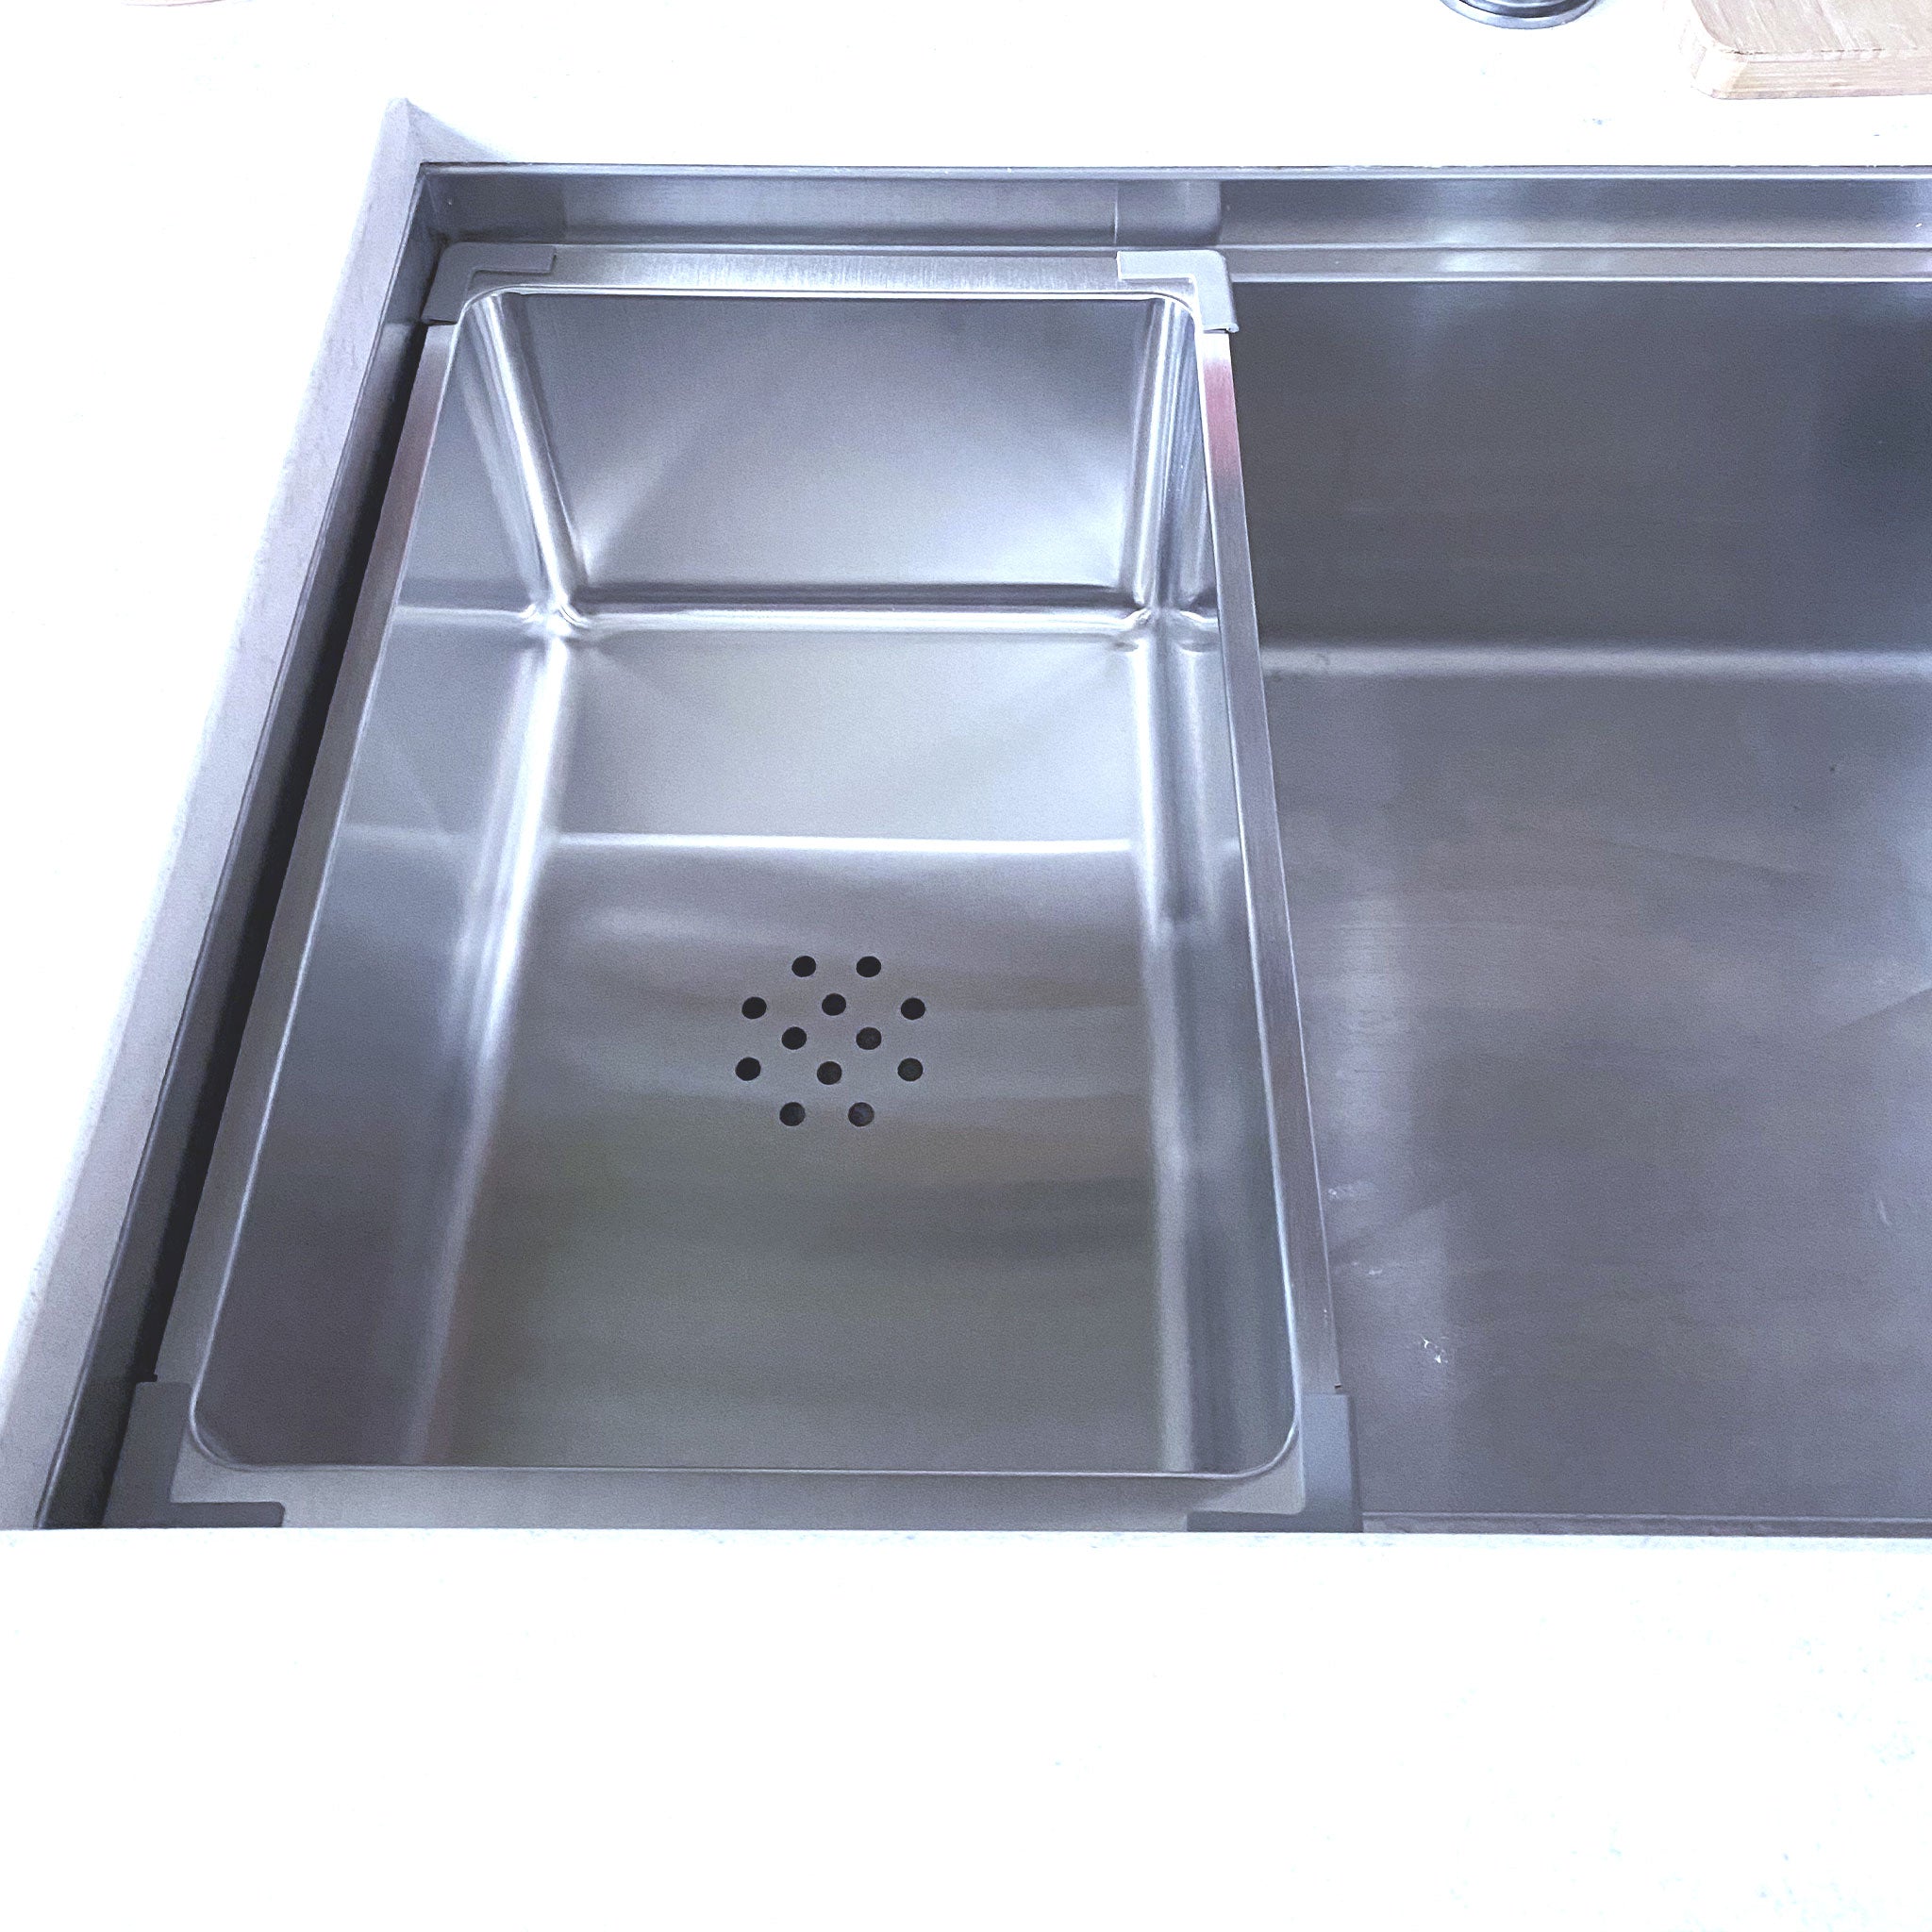 Stainless steel Beverage Tub Accessory for 10 inch deep Workstation Sink from Create Good Sinks